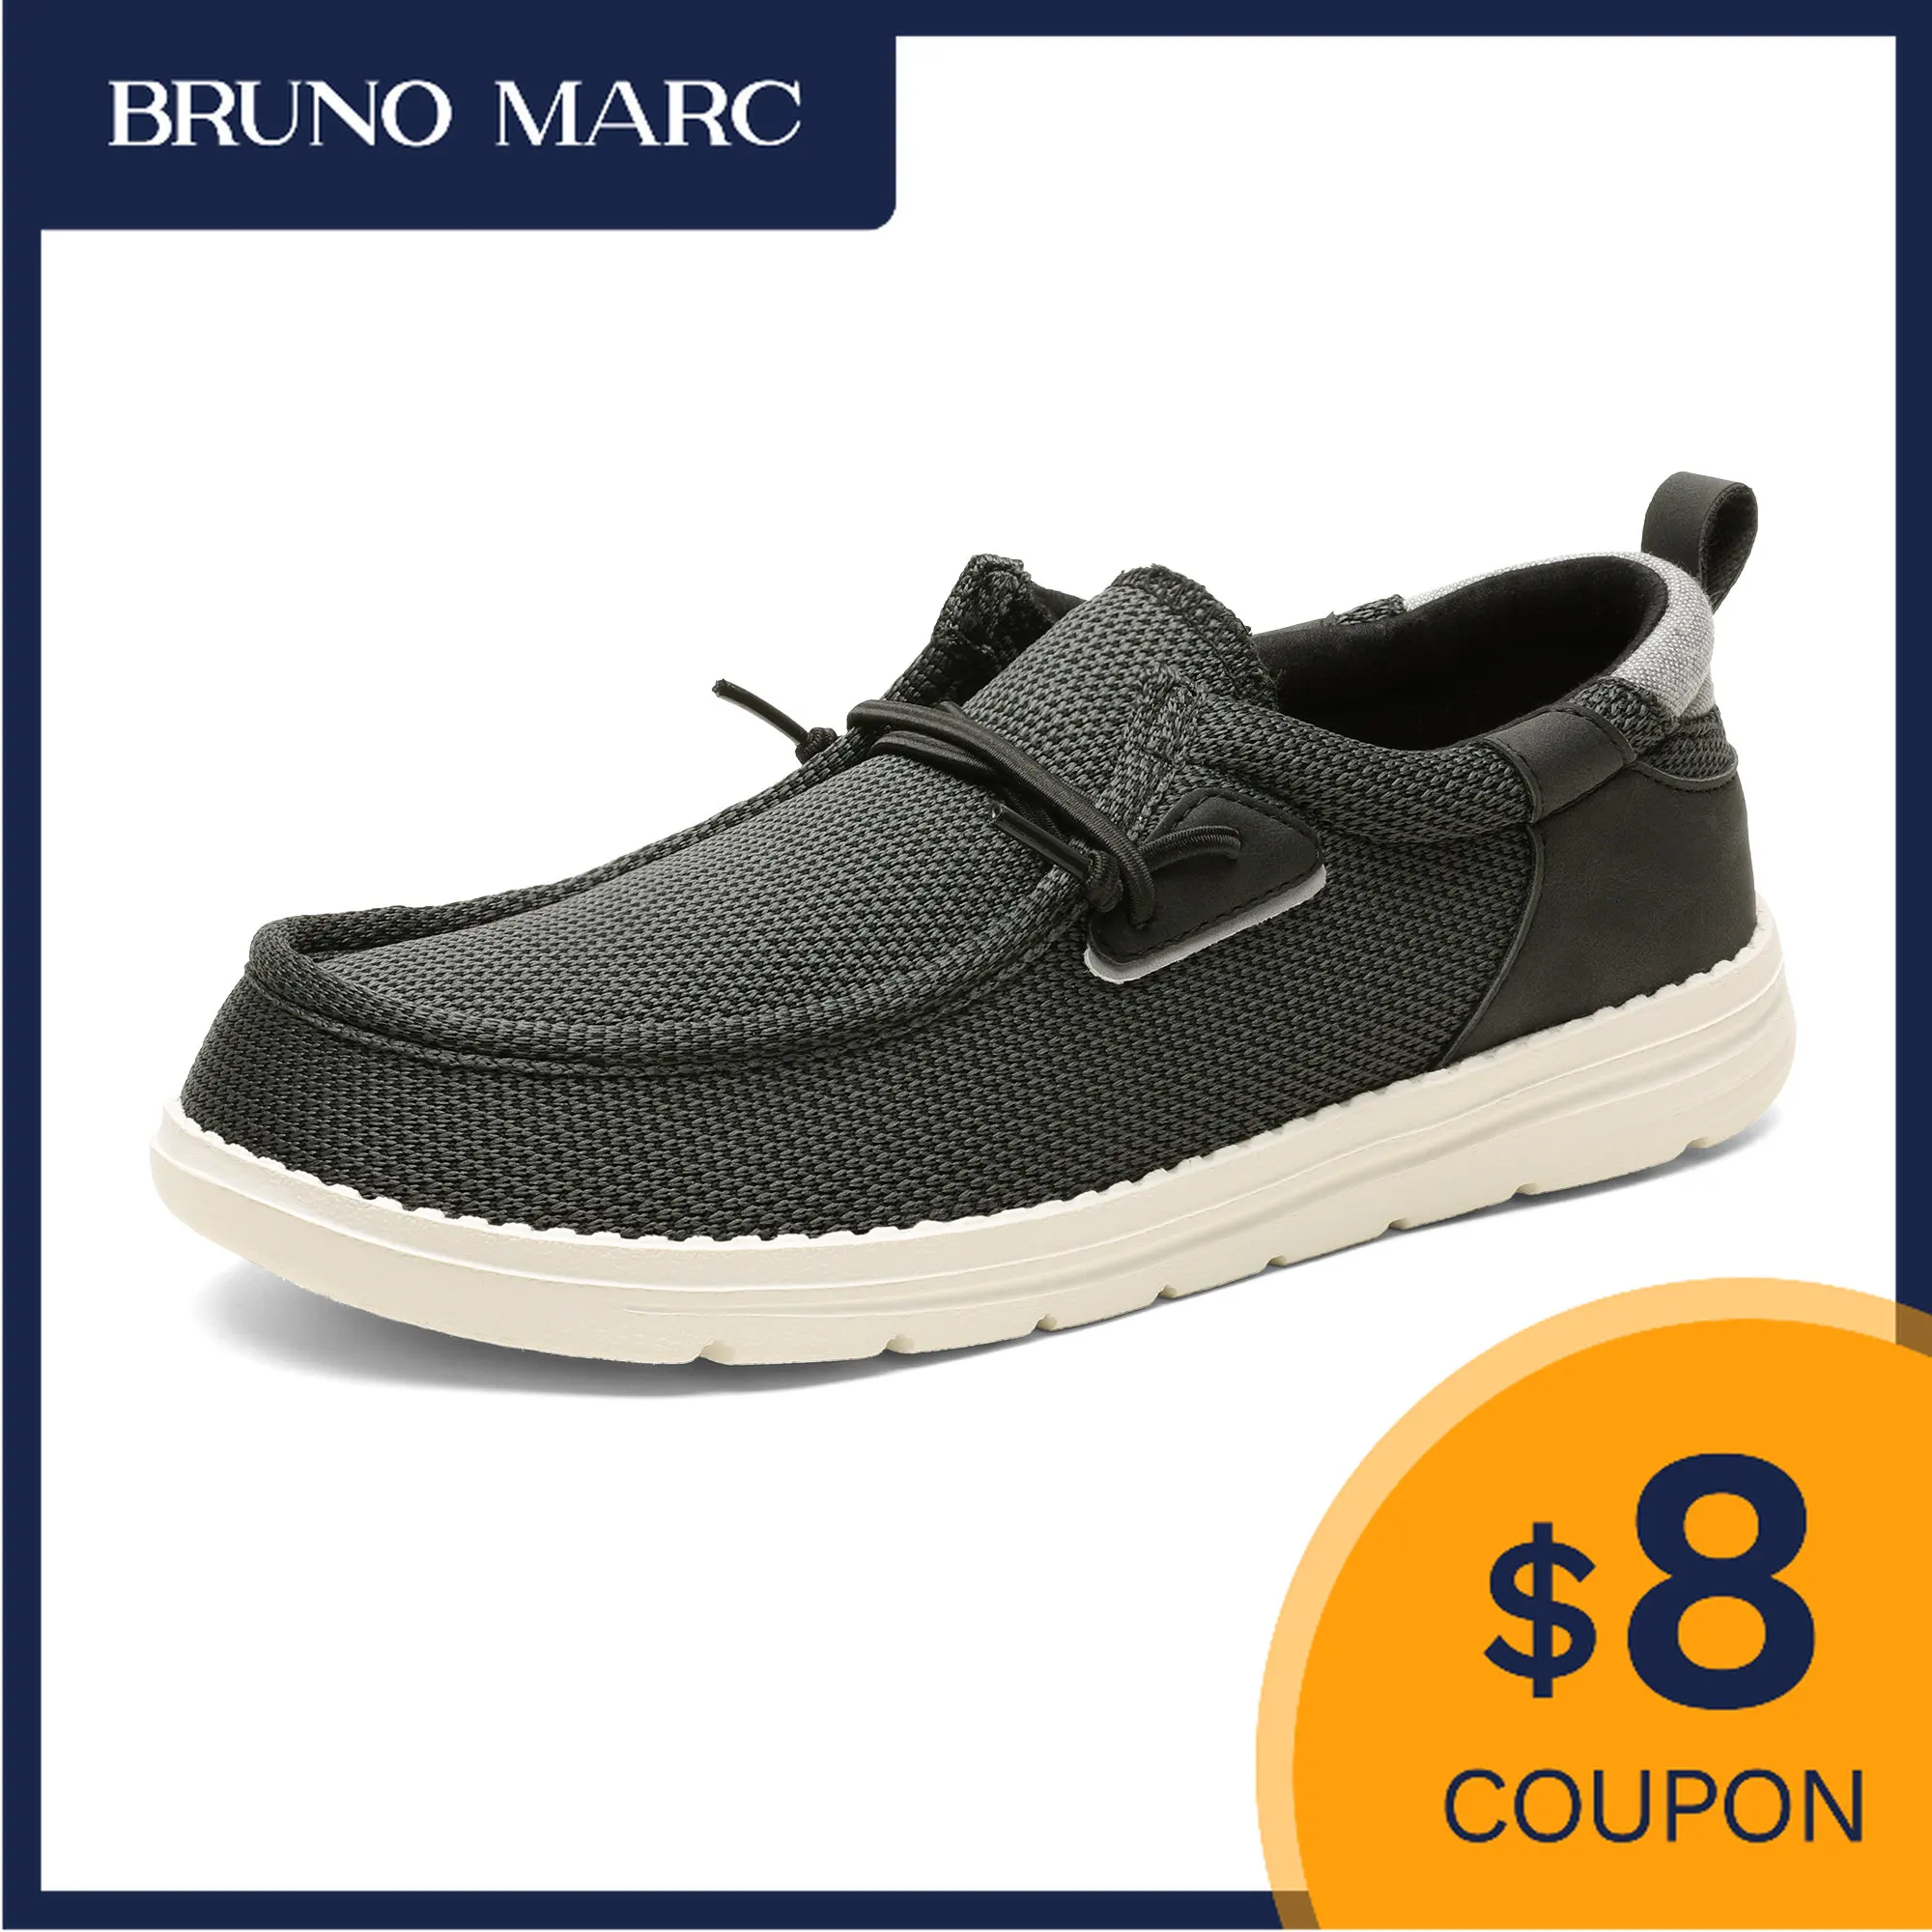 

Bruno Marc Men’s Slip-on Loafers Stretch Casual Shoes Comfortable Light-Weight Canvas Shoes Loafers Jungle Boat Shoes Sneakers